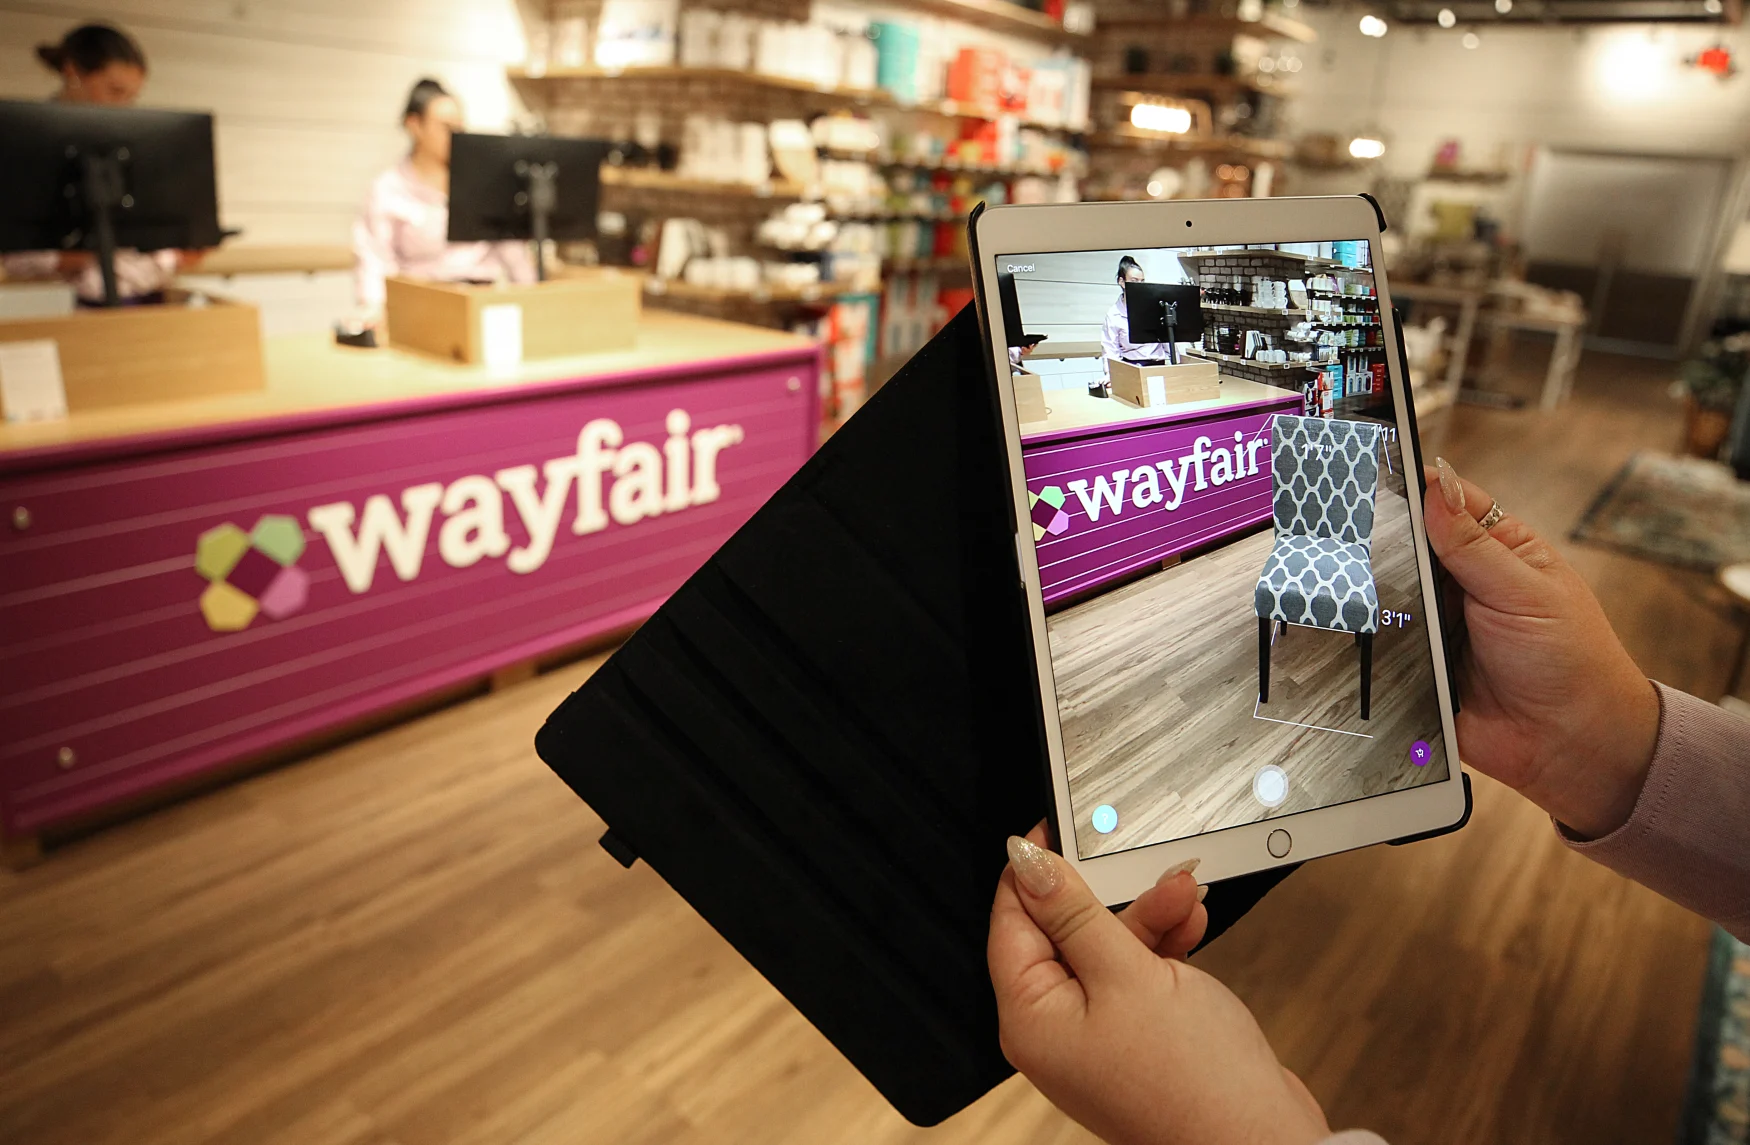 NATICK, MA - AUGUST 20: A virtual reality app is demonstrated at Wayfair's first store in the Natick Mall in Natick, MA on Aug.  20, 2019. Shoppers can don virtual reality headsets to see how furniture would fit into a space, using Wayfairs Room Planner tool.  They can virtually climb onto a dining room table to get a 360-degree view of a digitally rendered room, then swap out chairs, chandeliers, and art on the virtual walls.  That's just one example of how the Boston-based e-commerce giant has used its digital DNA to create its first brick-and-mortar store.  It opens Wednesday in the Natick Mall.  Product information, including prices and customer ratings, is displayed on screens that update in real time to reflect online price changes.  Staffers carry iPads with an augmented reality tool that makes furniture appear in a 3-D setting, or they can snap a picture of an item in the store and find dozens like it online.  (Photo by Suzanne Kreiter/The Boston Globe via Getty Images)